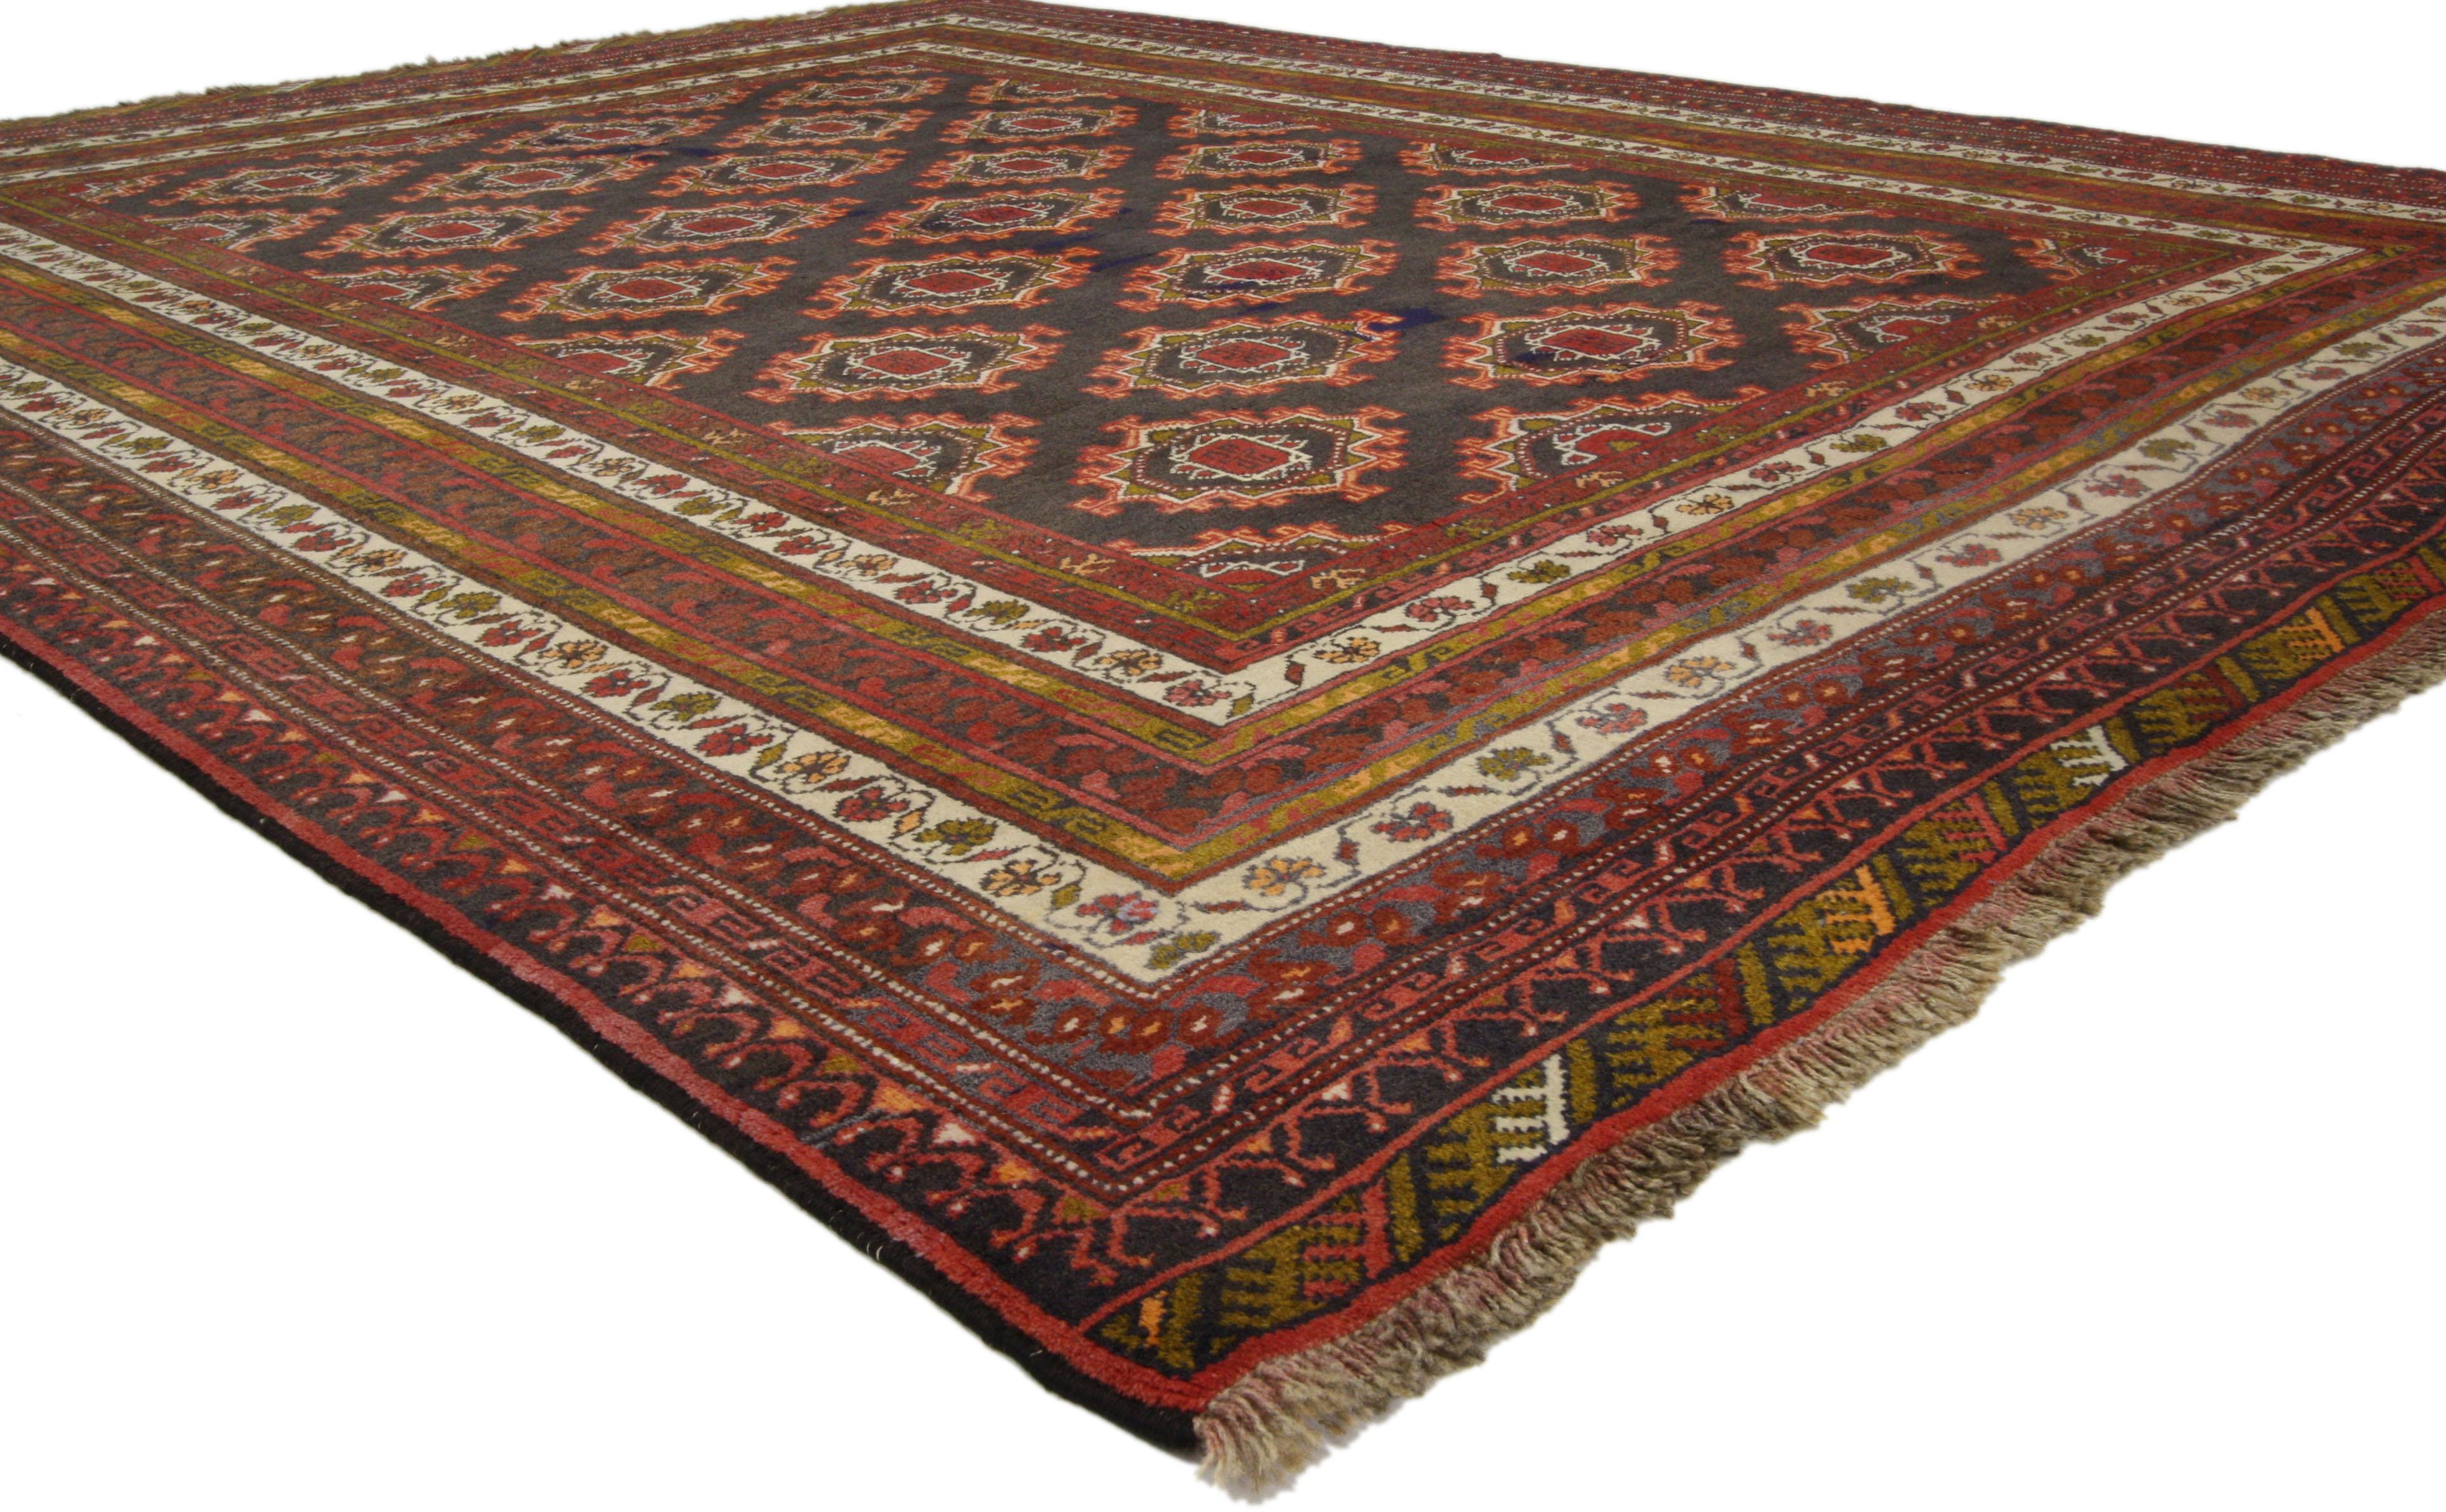 76030 Mid-Century Modern vintage Persian Baluch rug with Tribal style. This hand knotted wool vintage Persian Baluch rug with tribal style features an all-over geometric pattern composed of five vertical columns of repeating gul motifs. A series of